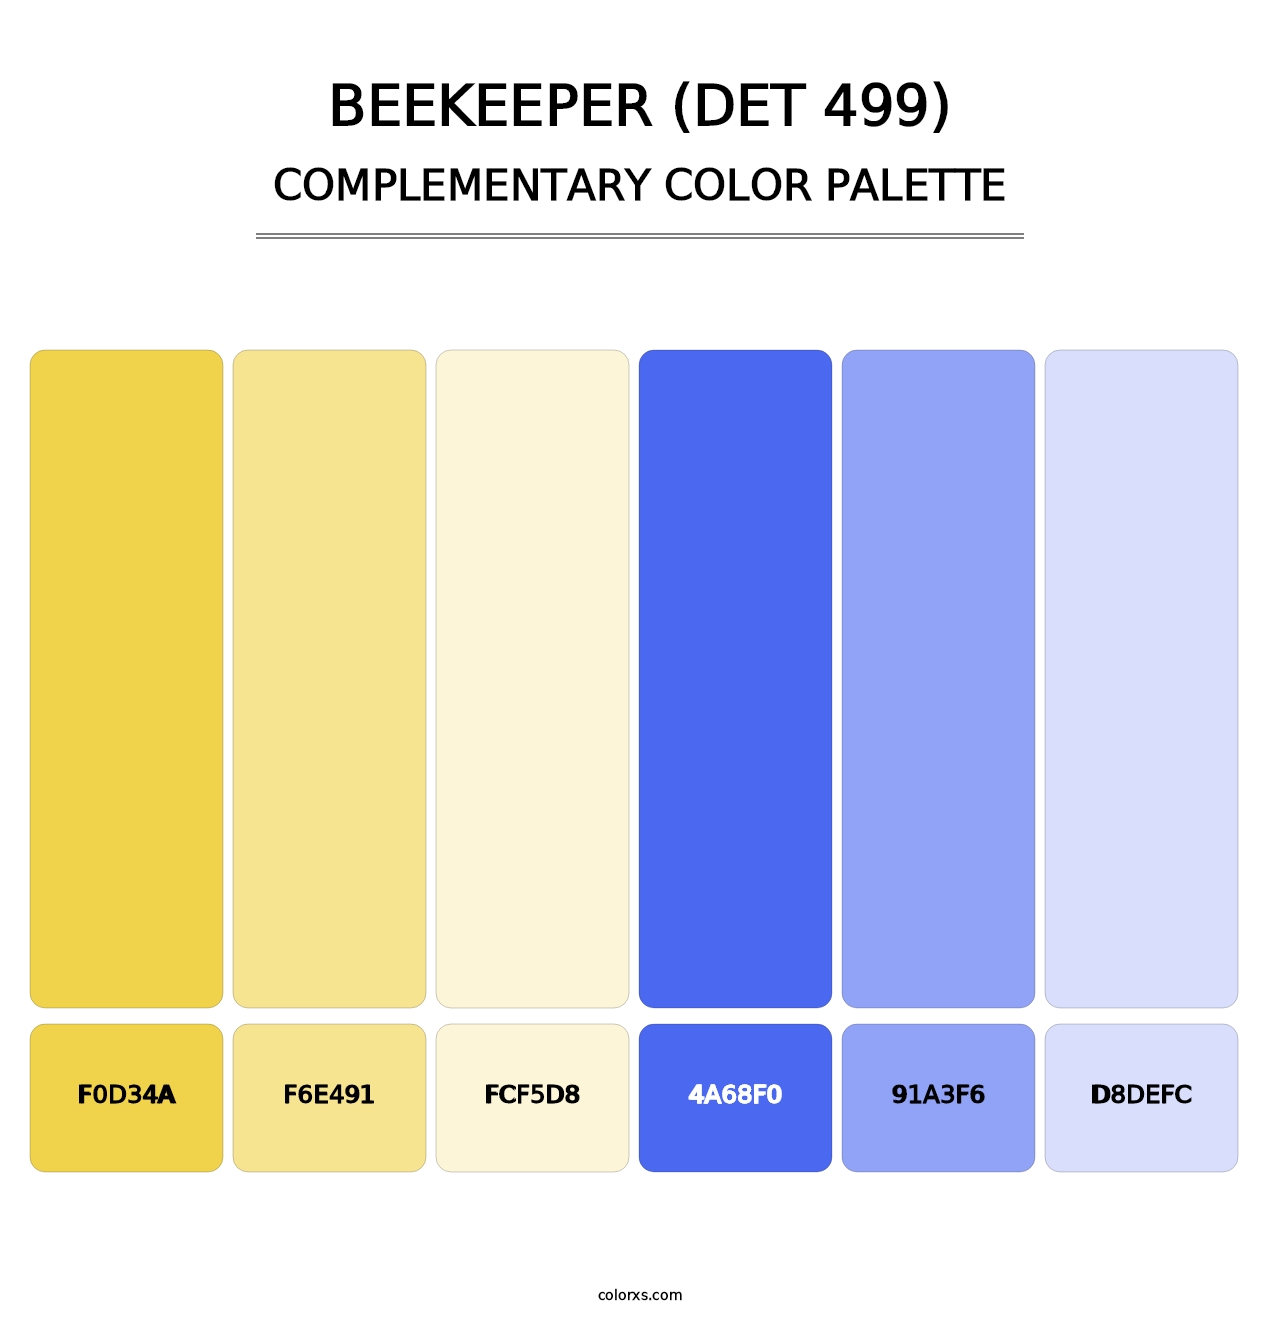 Beekeeper (DET 499) - Complementary Color Palette